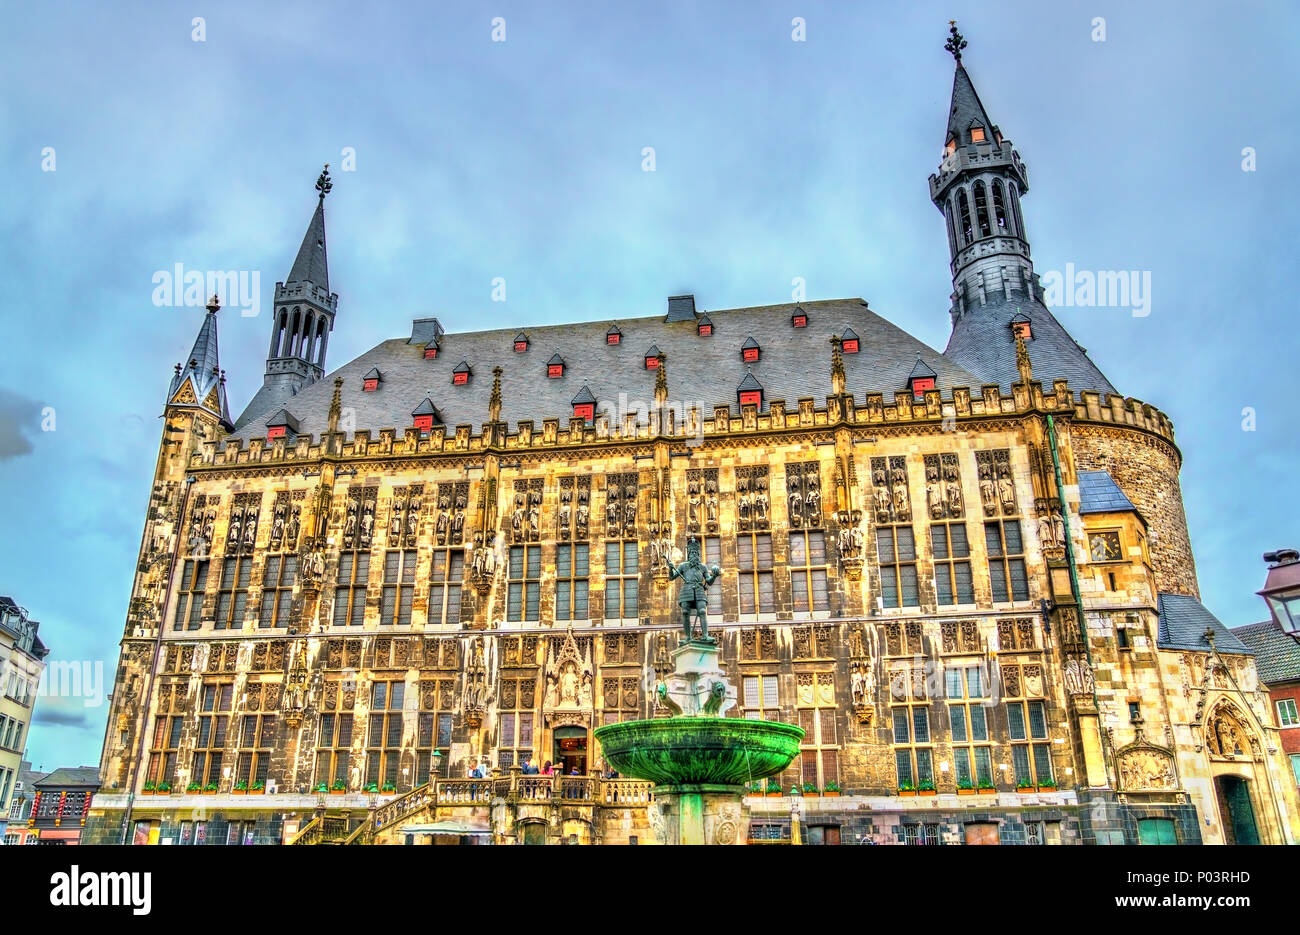 Aachener Rathaus, the Town Hall of Aachen, built in the Gothic style. Germany Stock Photo